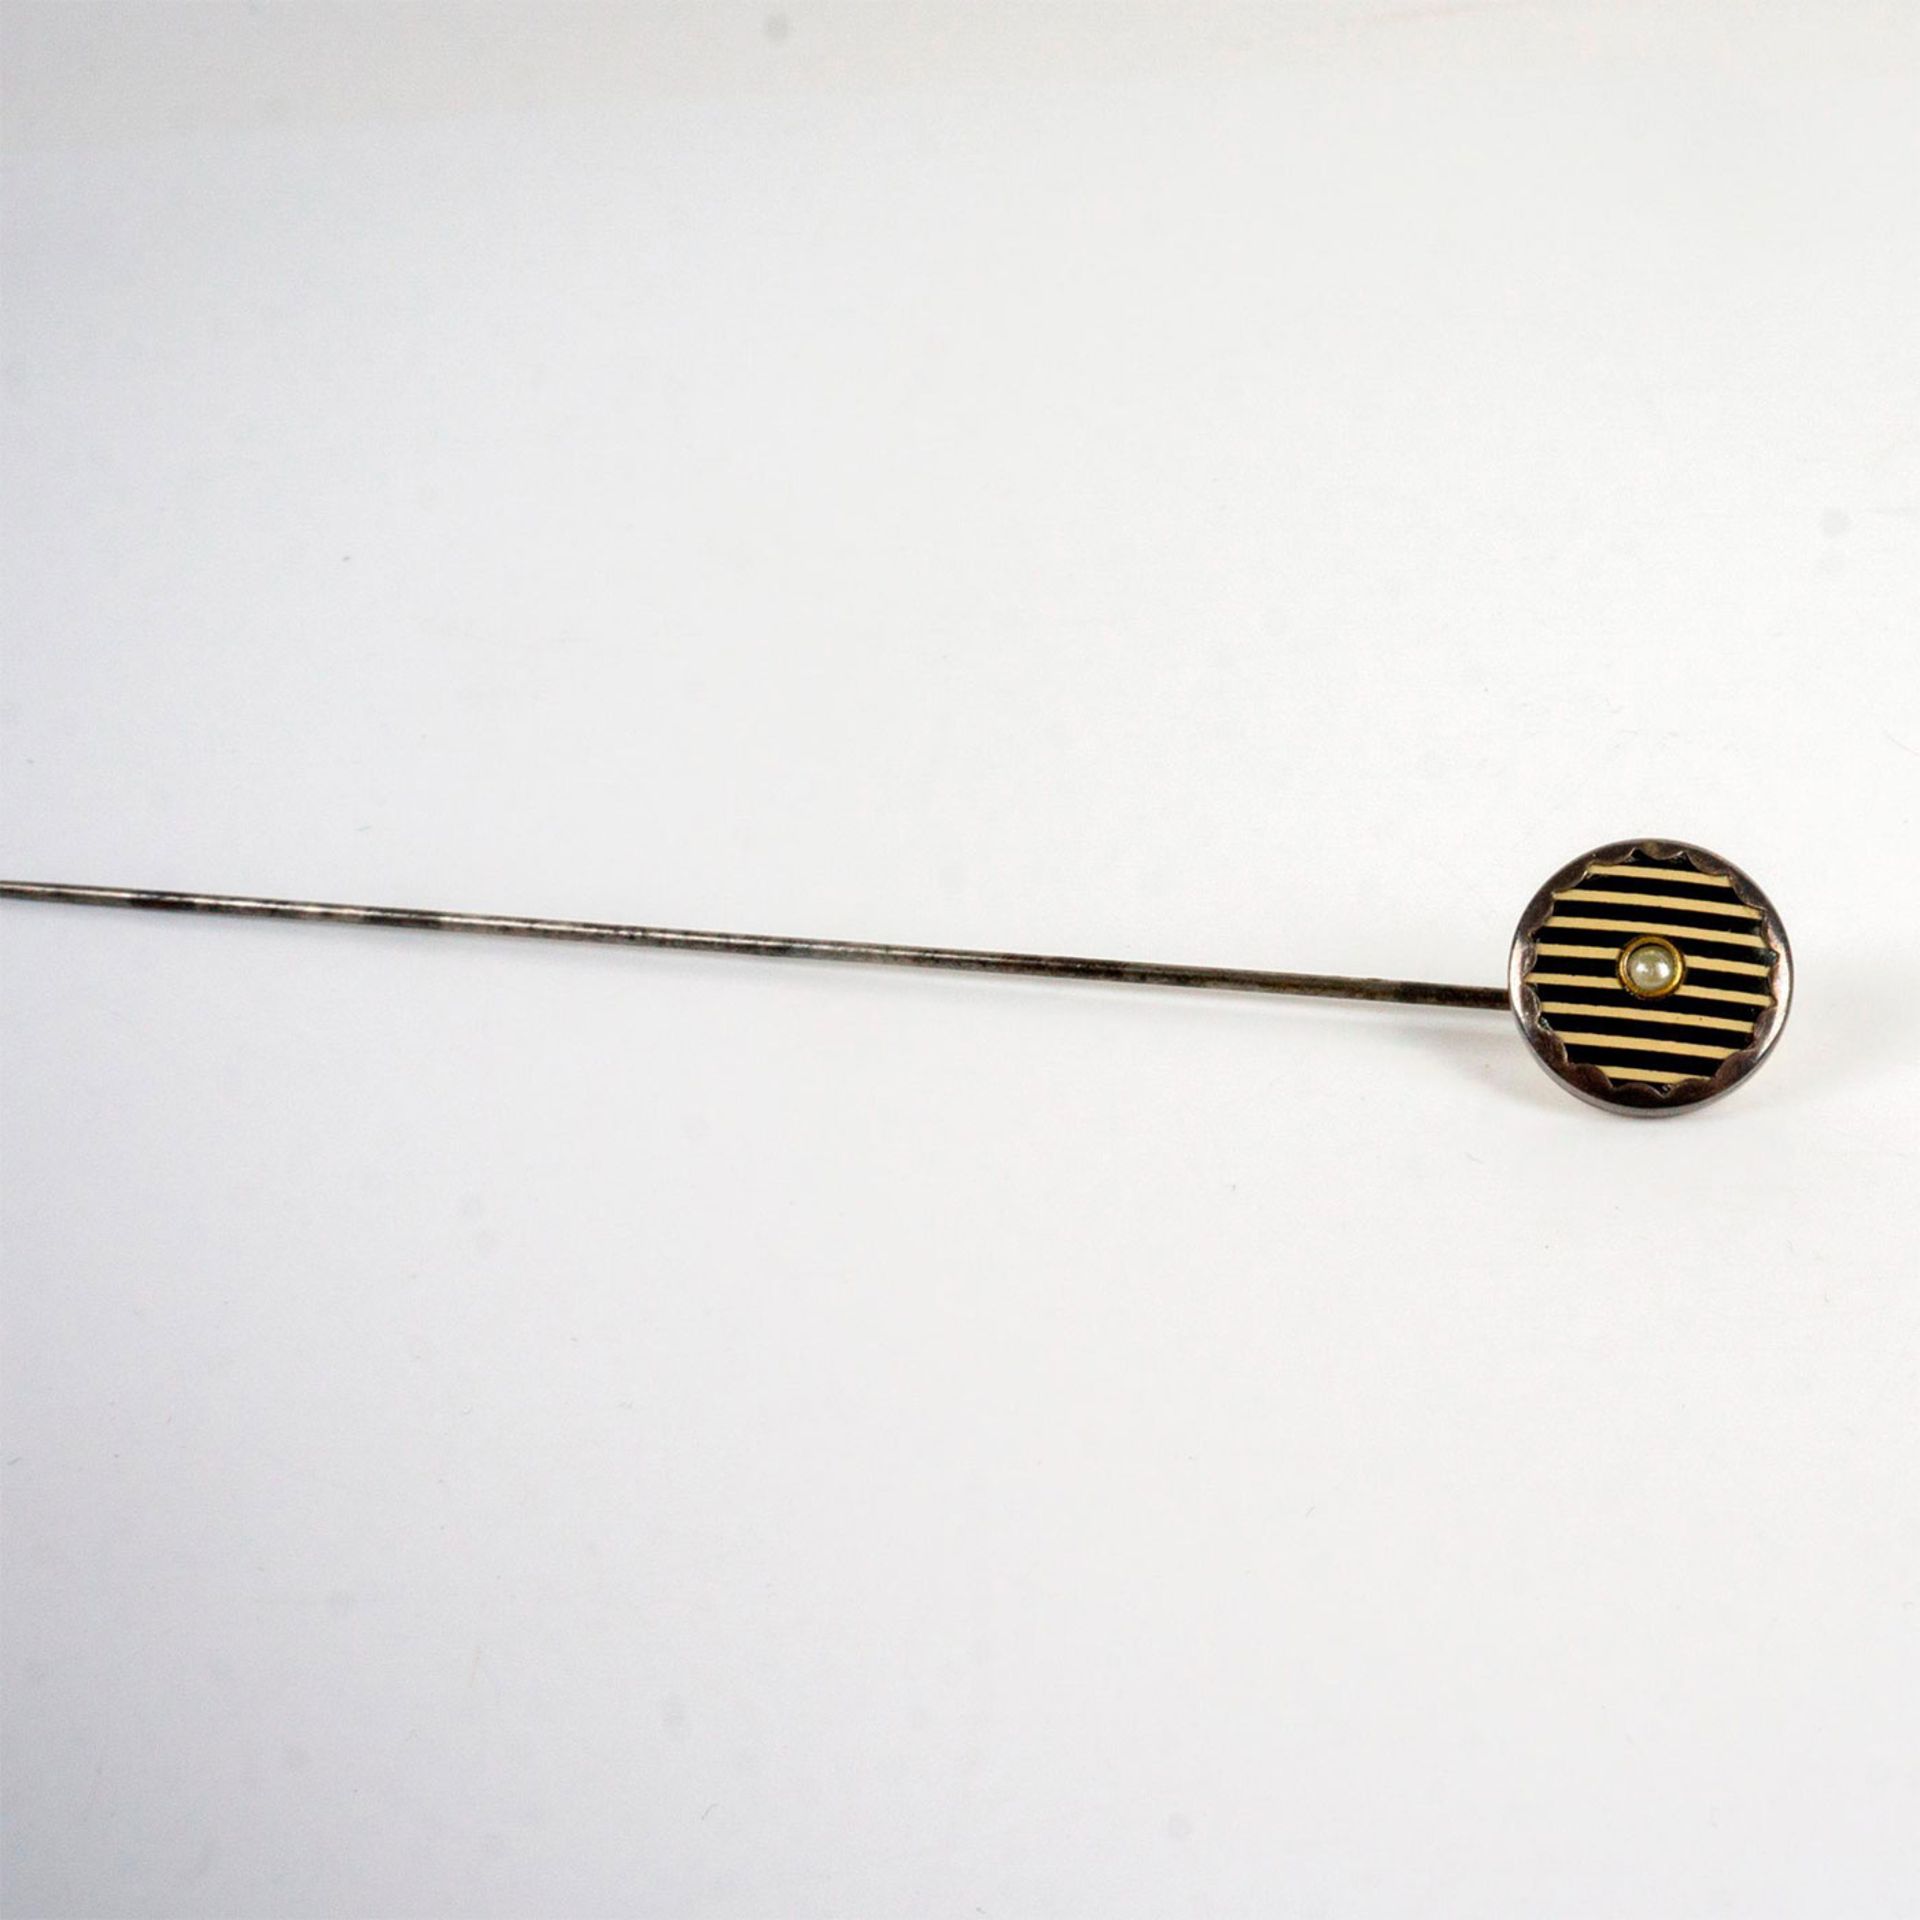 Vintage Silver Hat Pin, Pearl and Stripes - Bild 3 aus 4